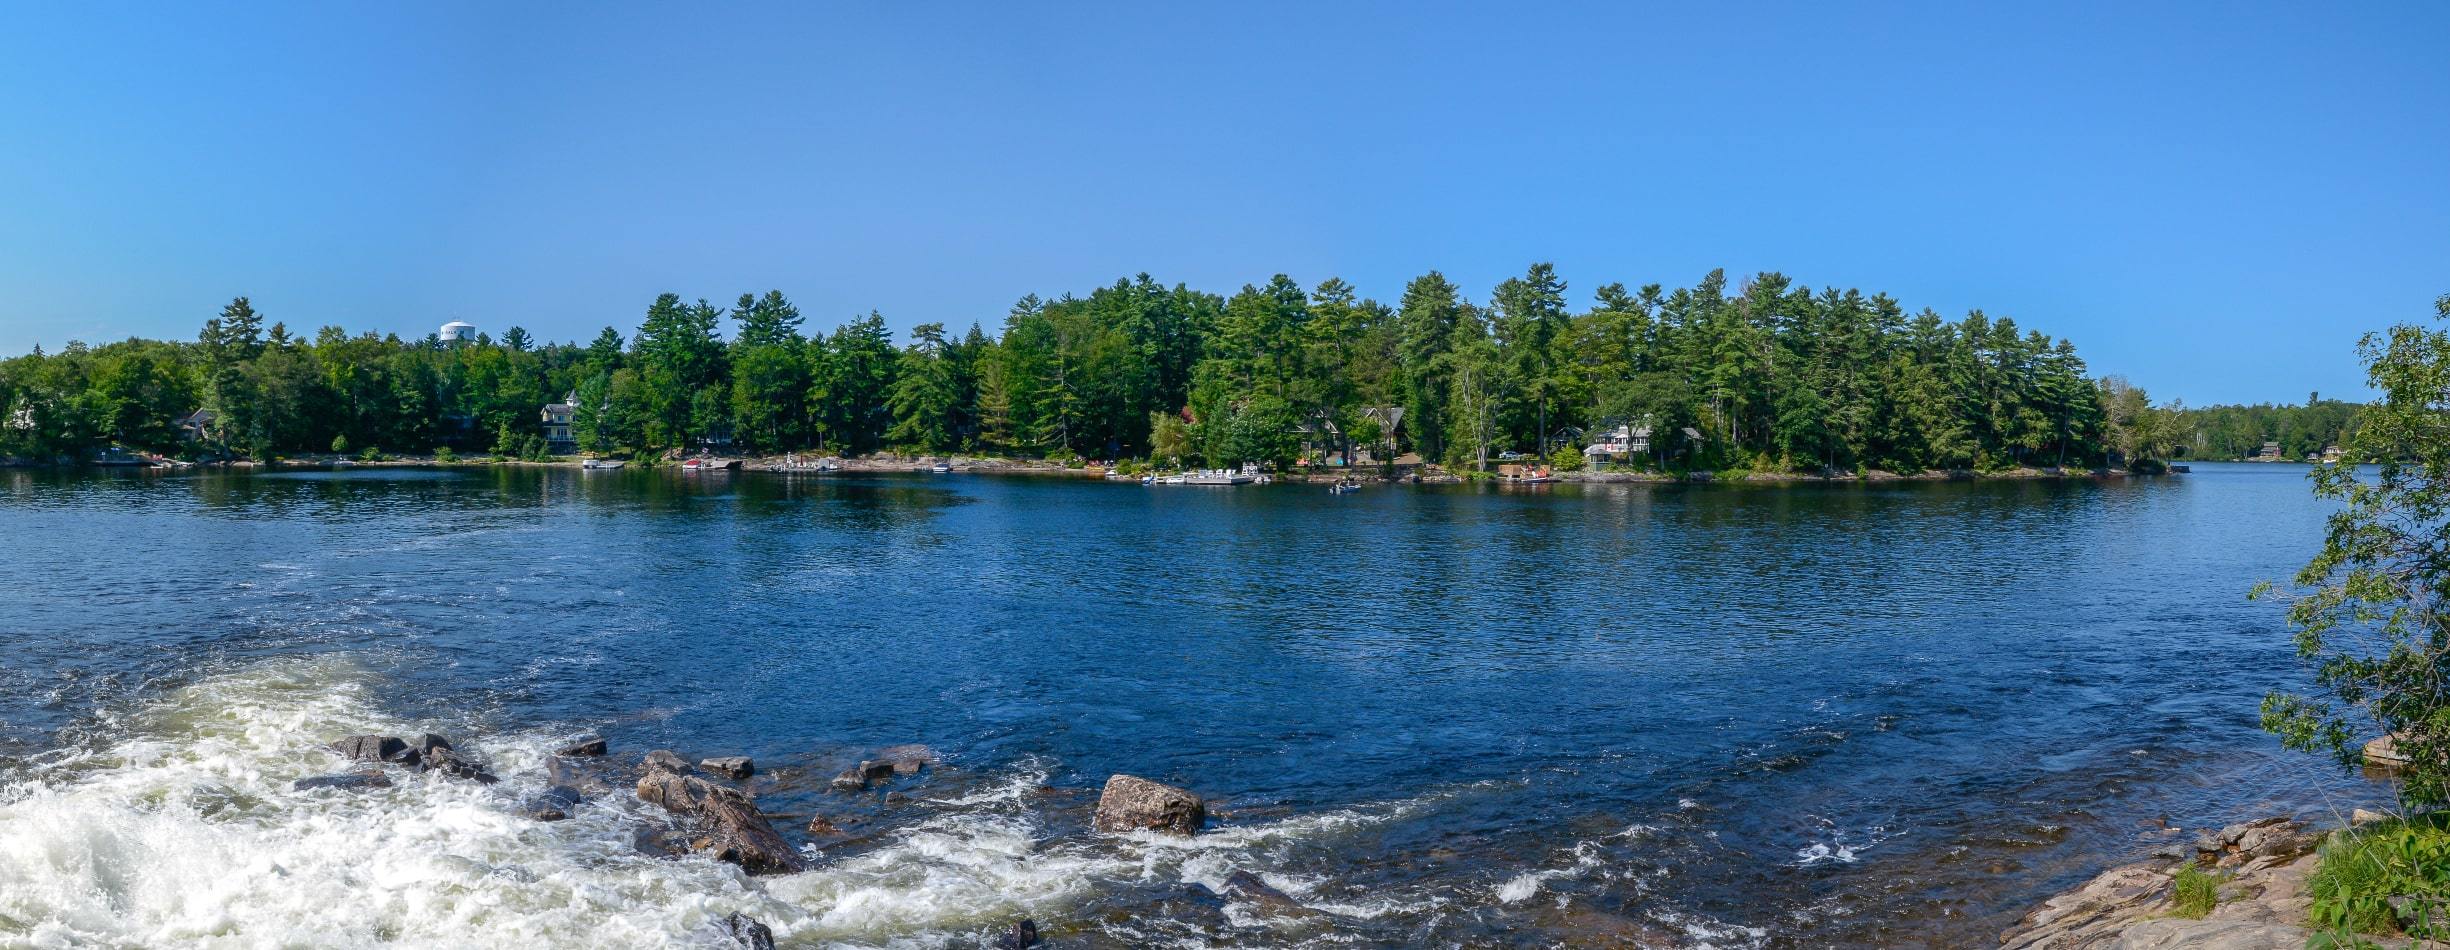 Sunny Bala Falls and forest view in Bala, ON